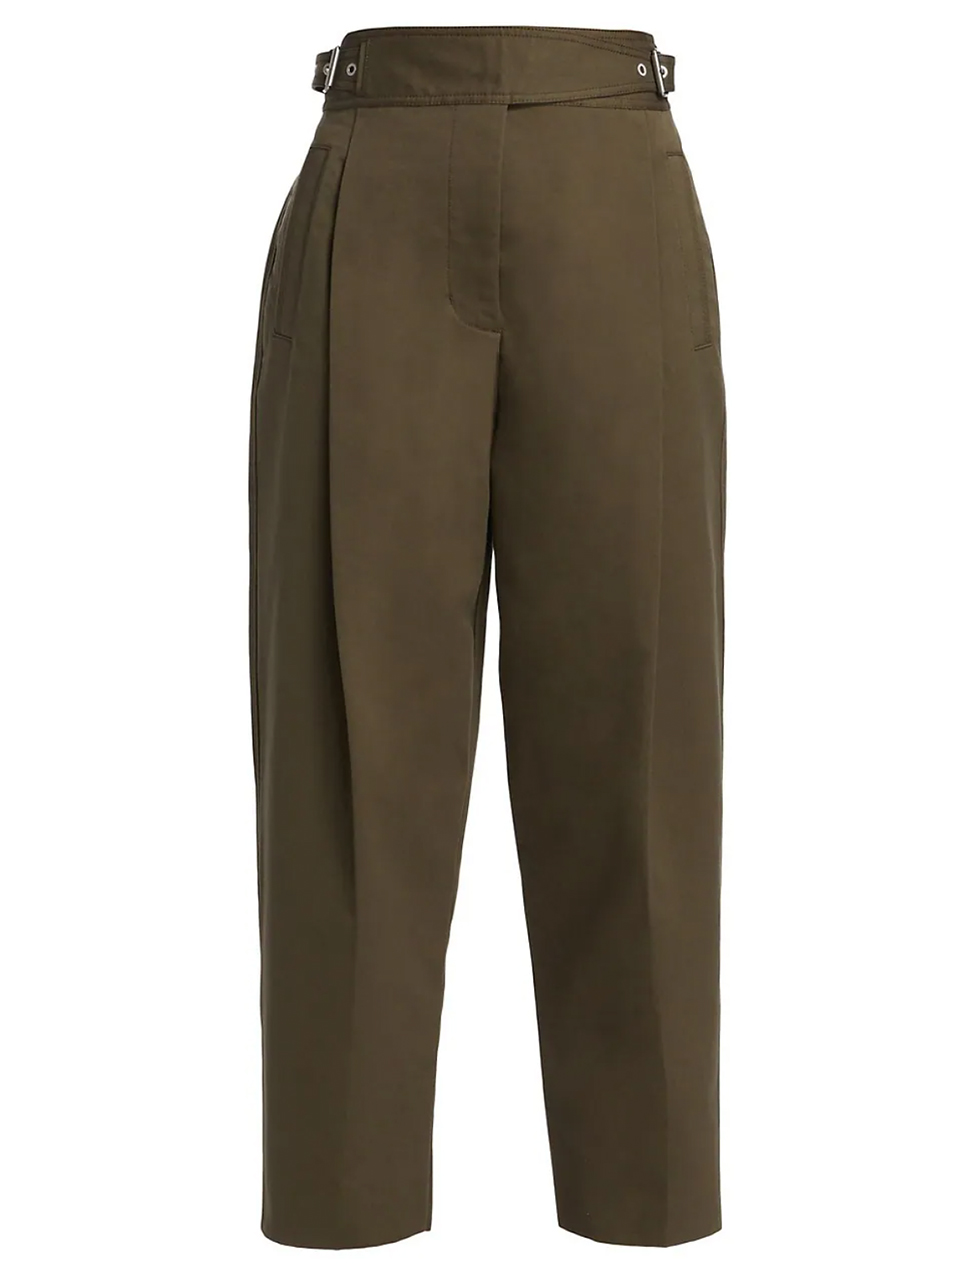 3.1 Phillip Lim Utility Faille Pleated Tapered Trouser in Army Product Shot 